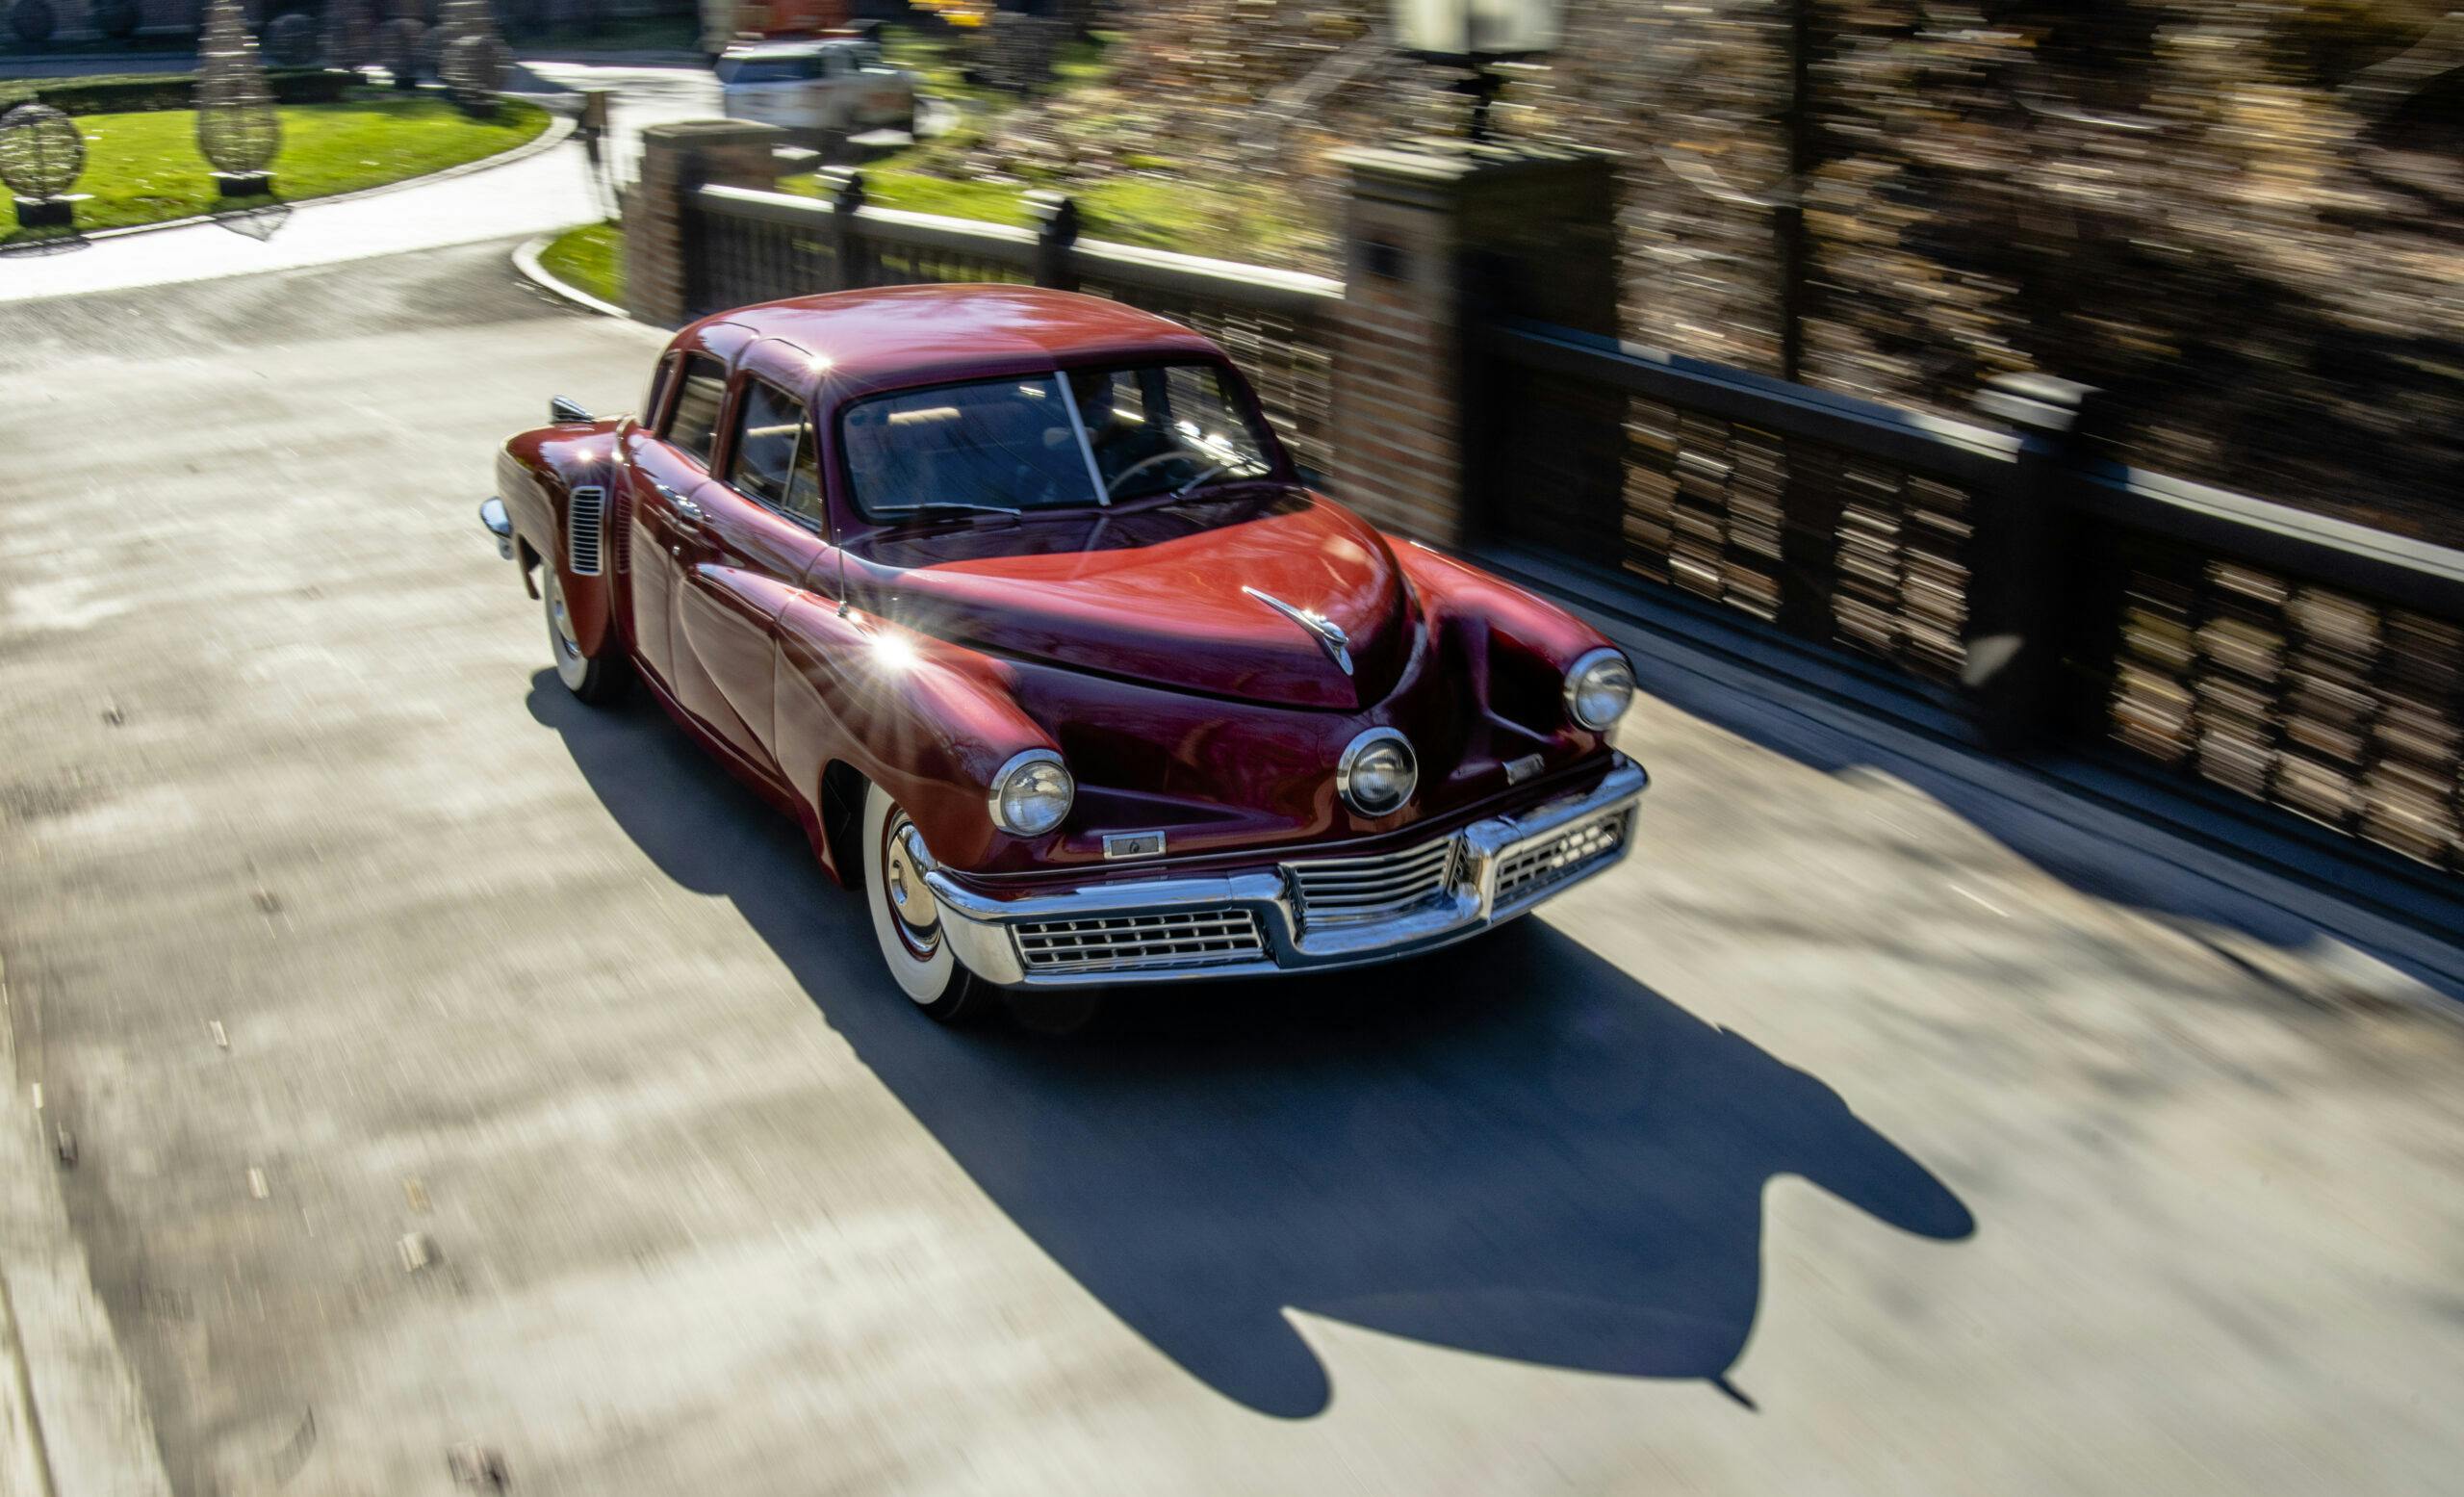 The History of the Tucker 48 - Gizmo Highway Technology Guide